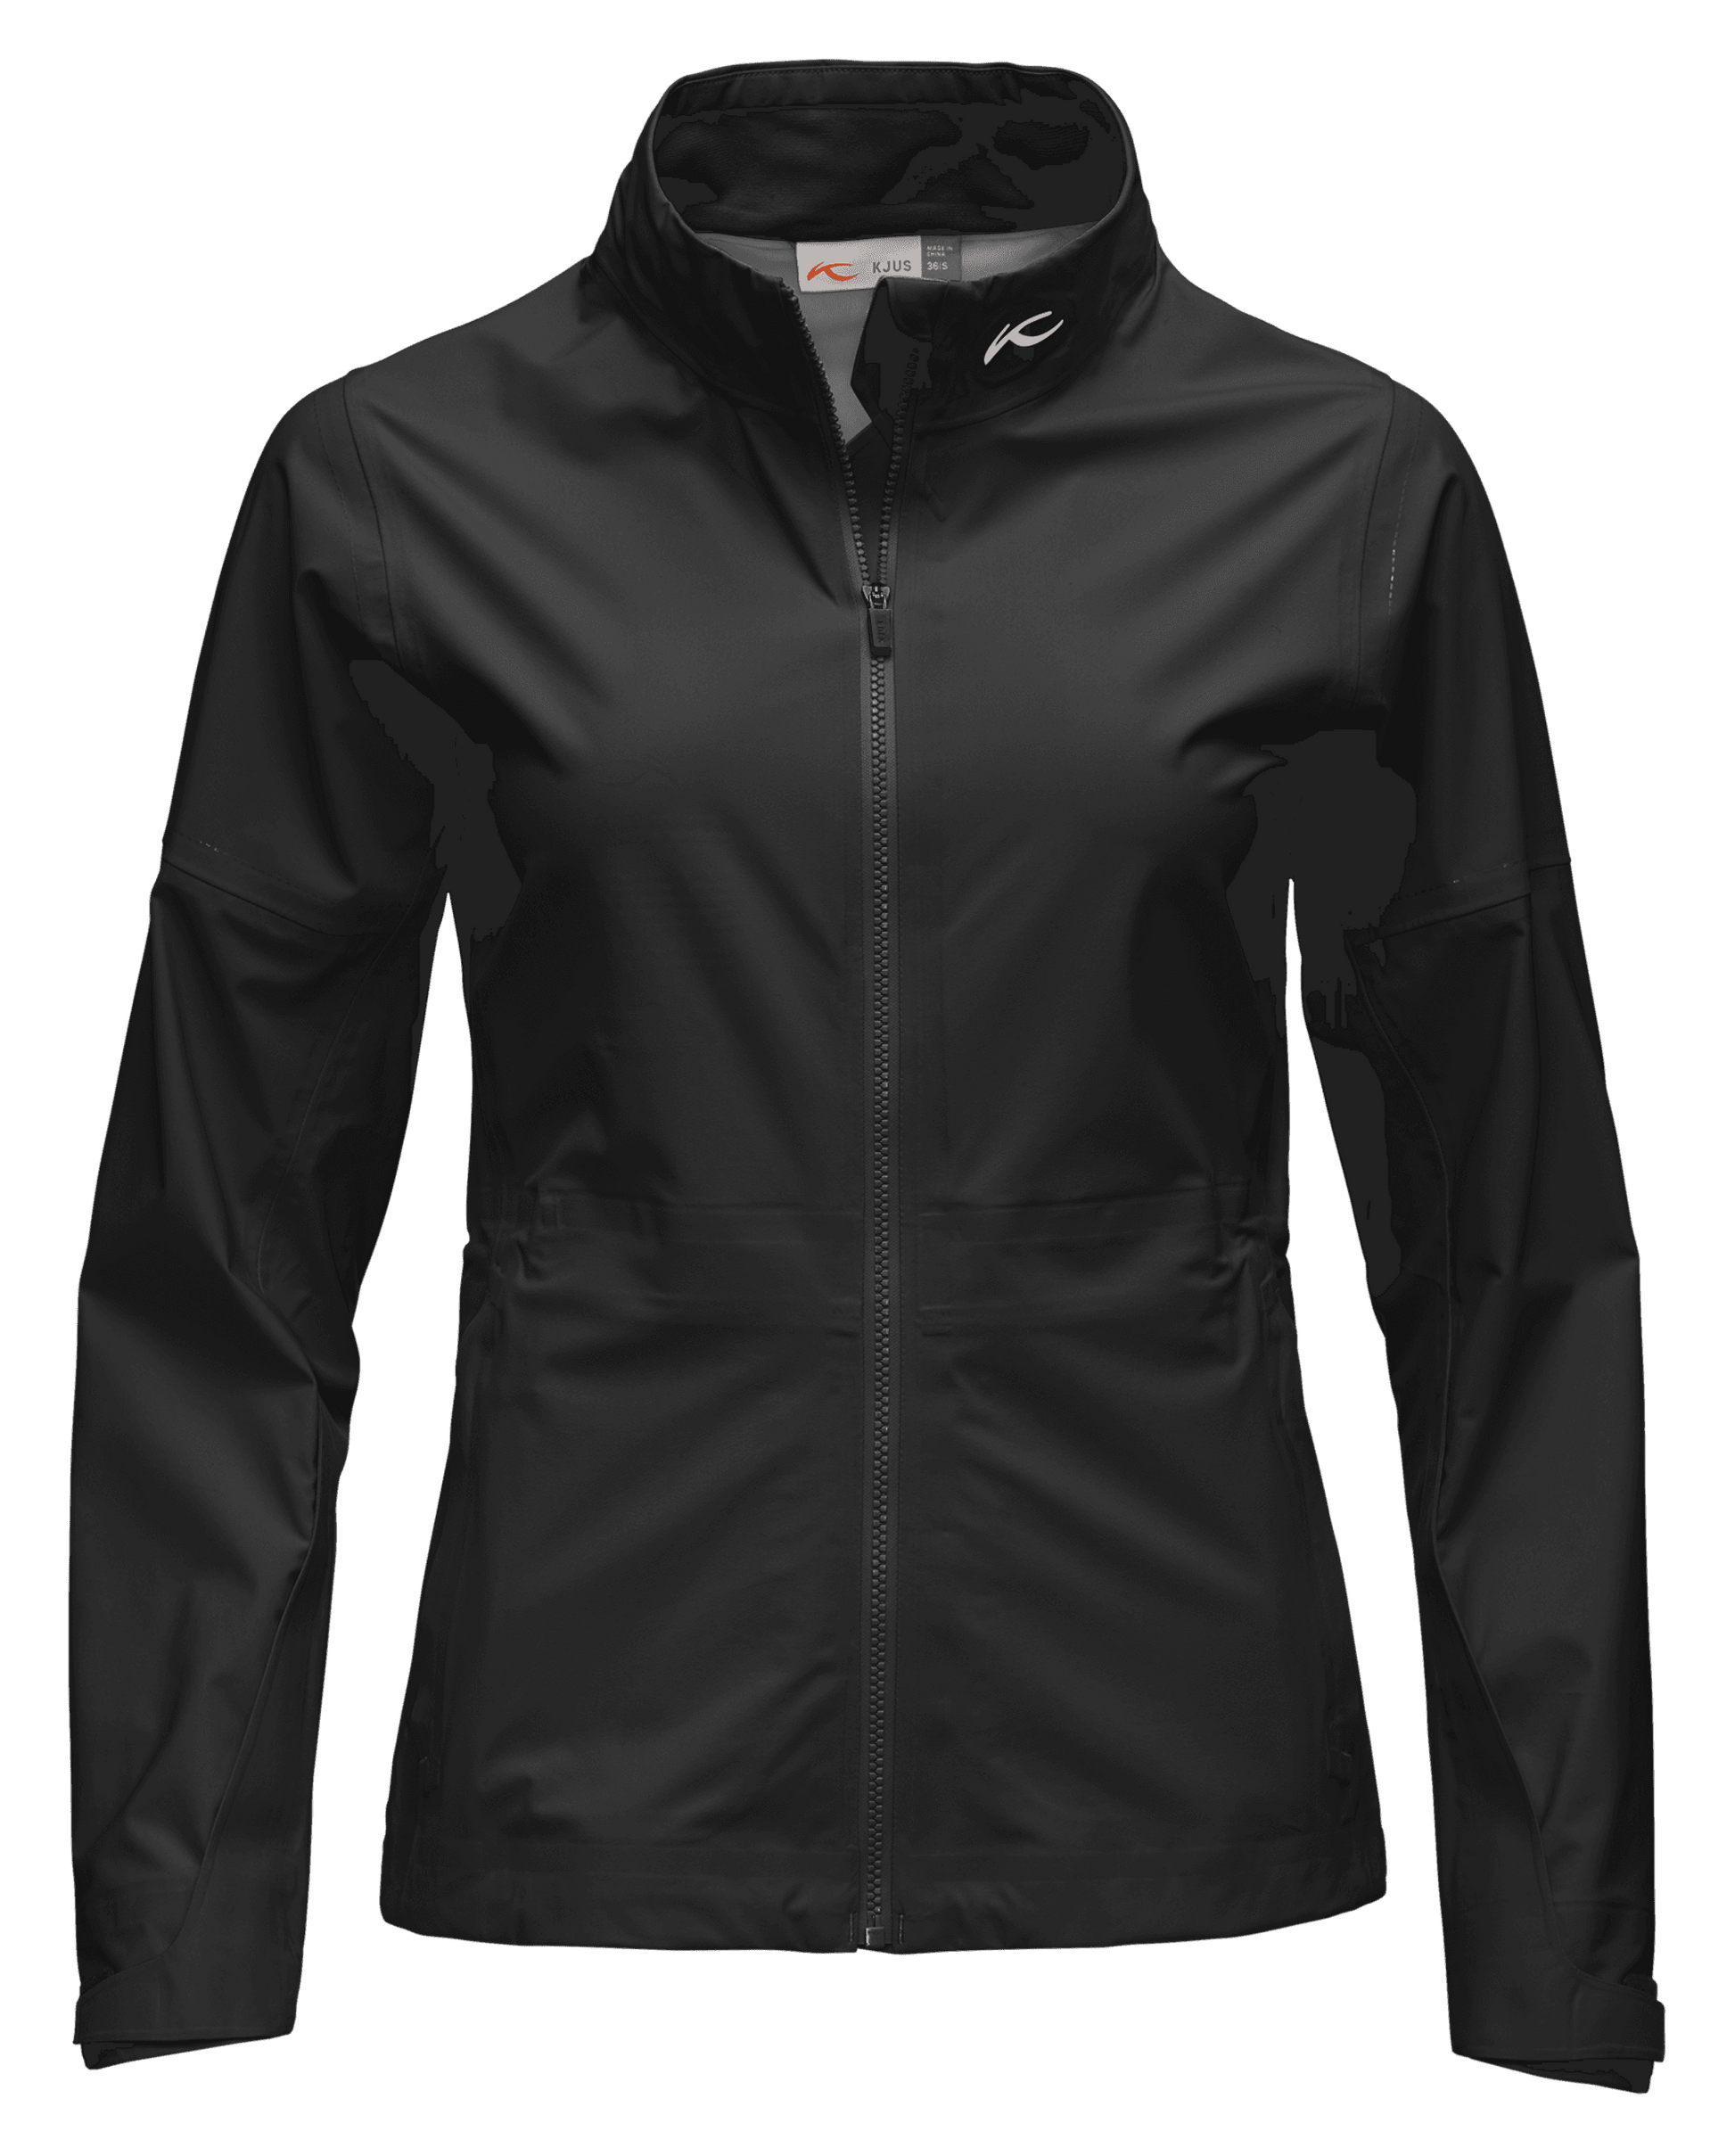 Women Pro 3L Jacket by Kjus - The Luxury Promotional Gifts Company Limited